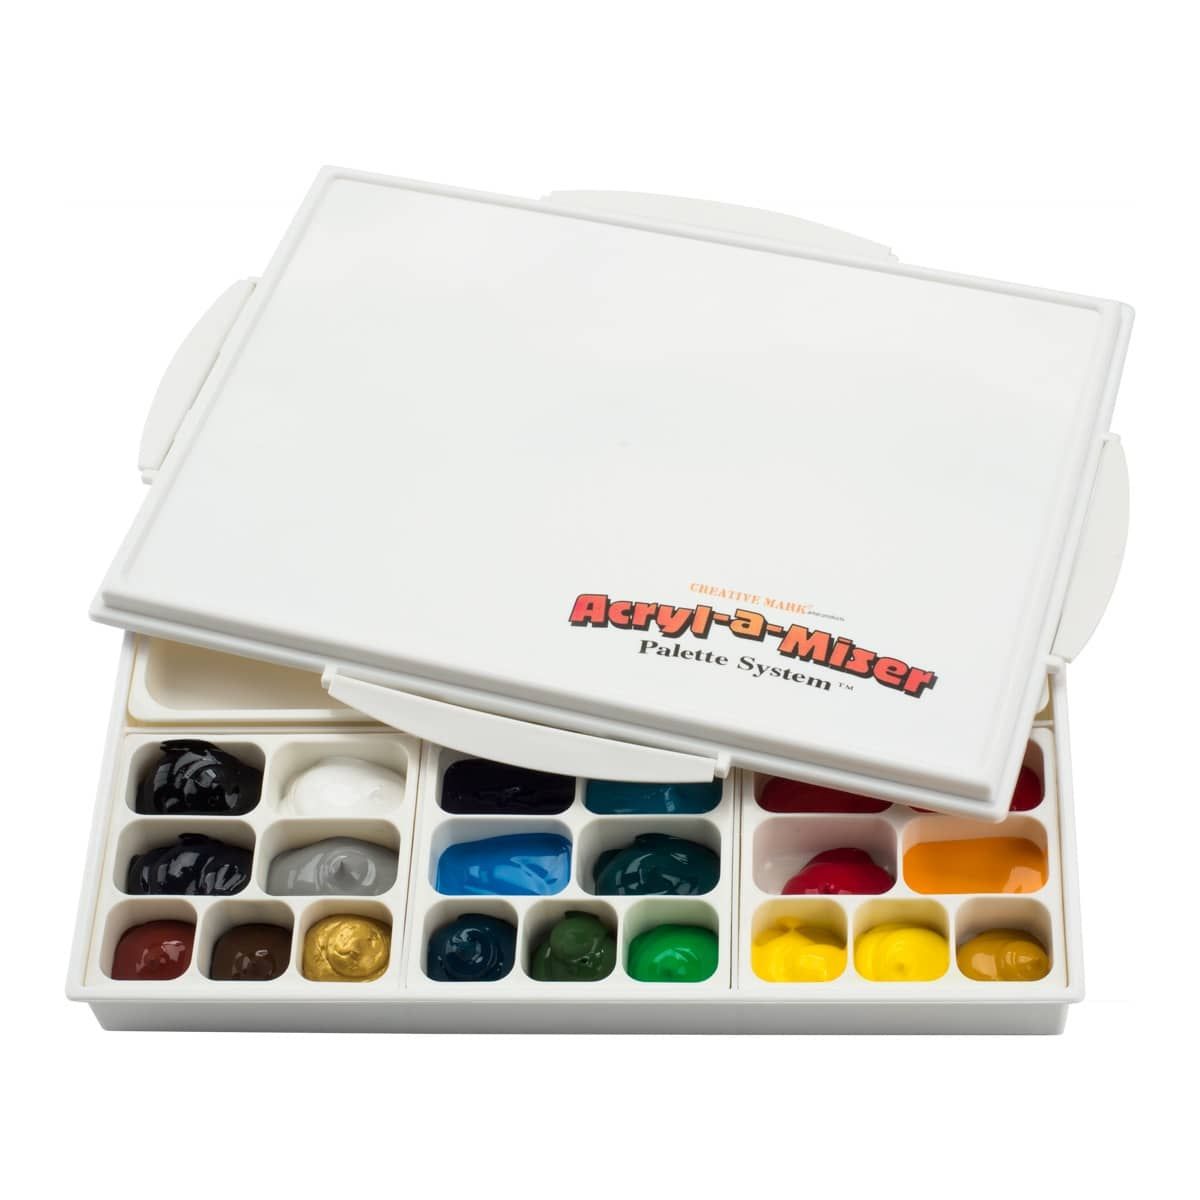 Masterson Sta-Wet Paint Palette with Airtight Lid, Keeps Wet Paint Fresh for Days, Paint Supplies, Paint Tray Palette, Paint Holder, with 30 Acrylic